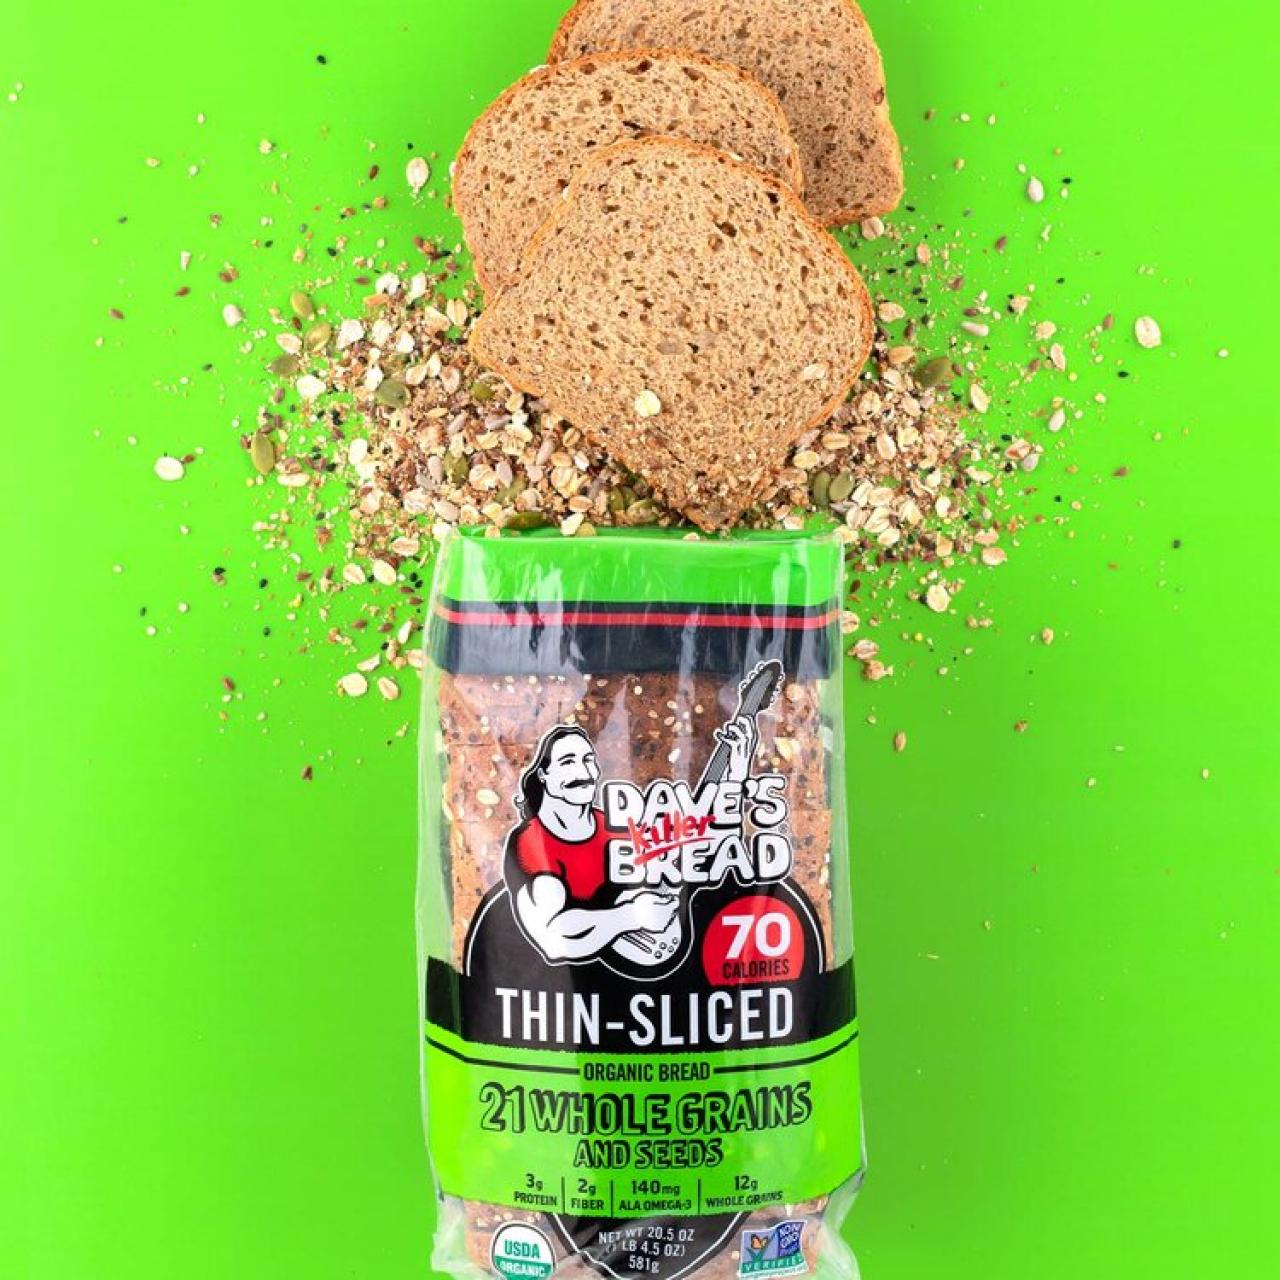 https://food.fnr.sndimg.com/content/dam/images/food/products/2022/1/6/rx_daves-killer-bread-thin-sliced.jpeg.rend.hgtvcom.1280.1280.suffix/1641508462359.jpeg